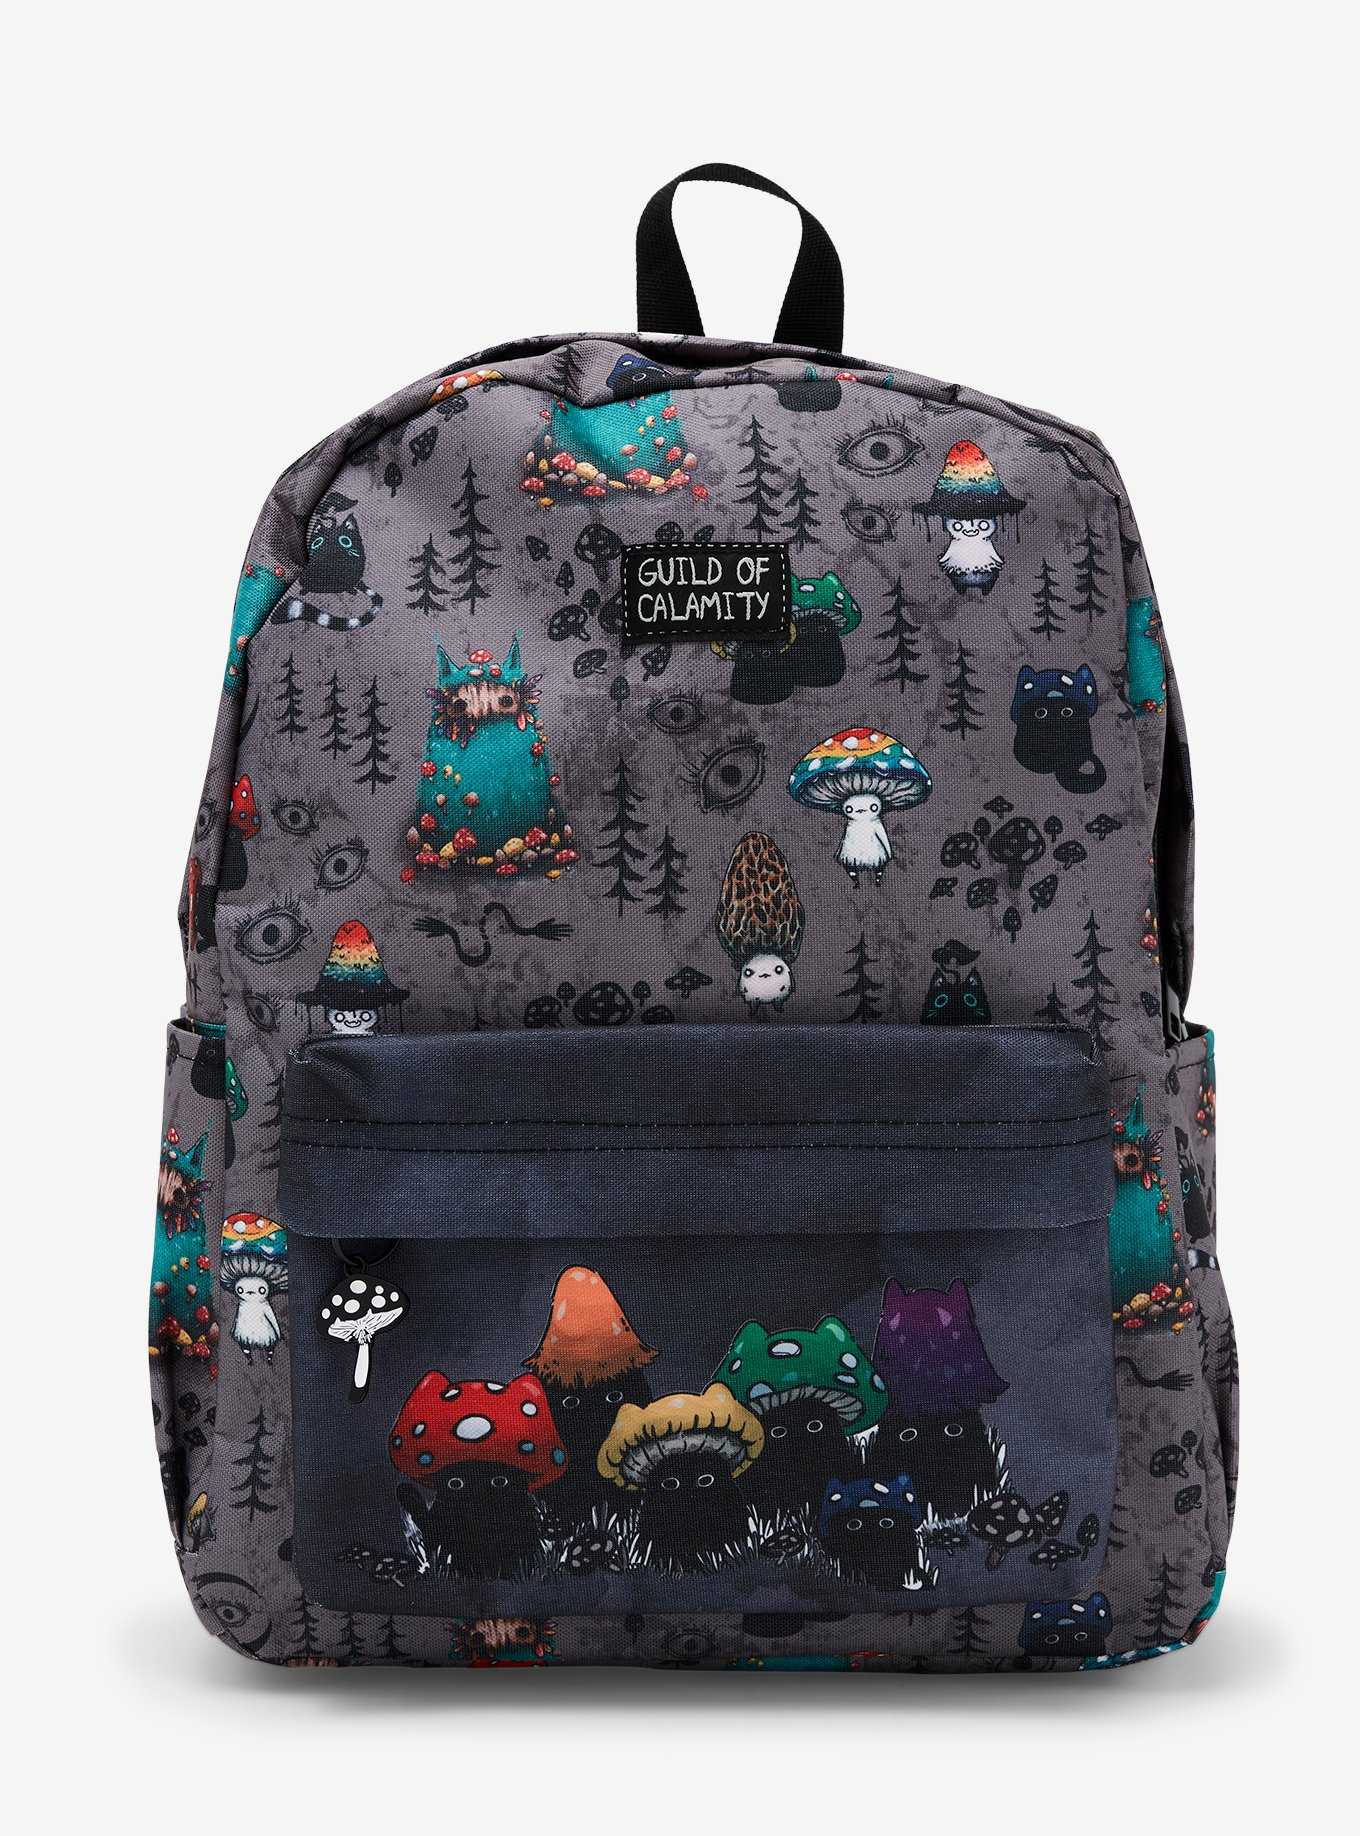 Guild Of Calamity Rainbow Forest Cat Backpack, , hi-res